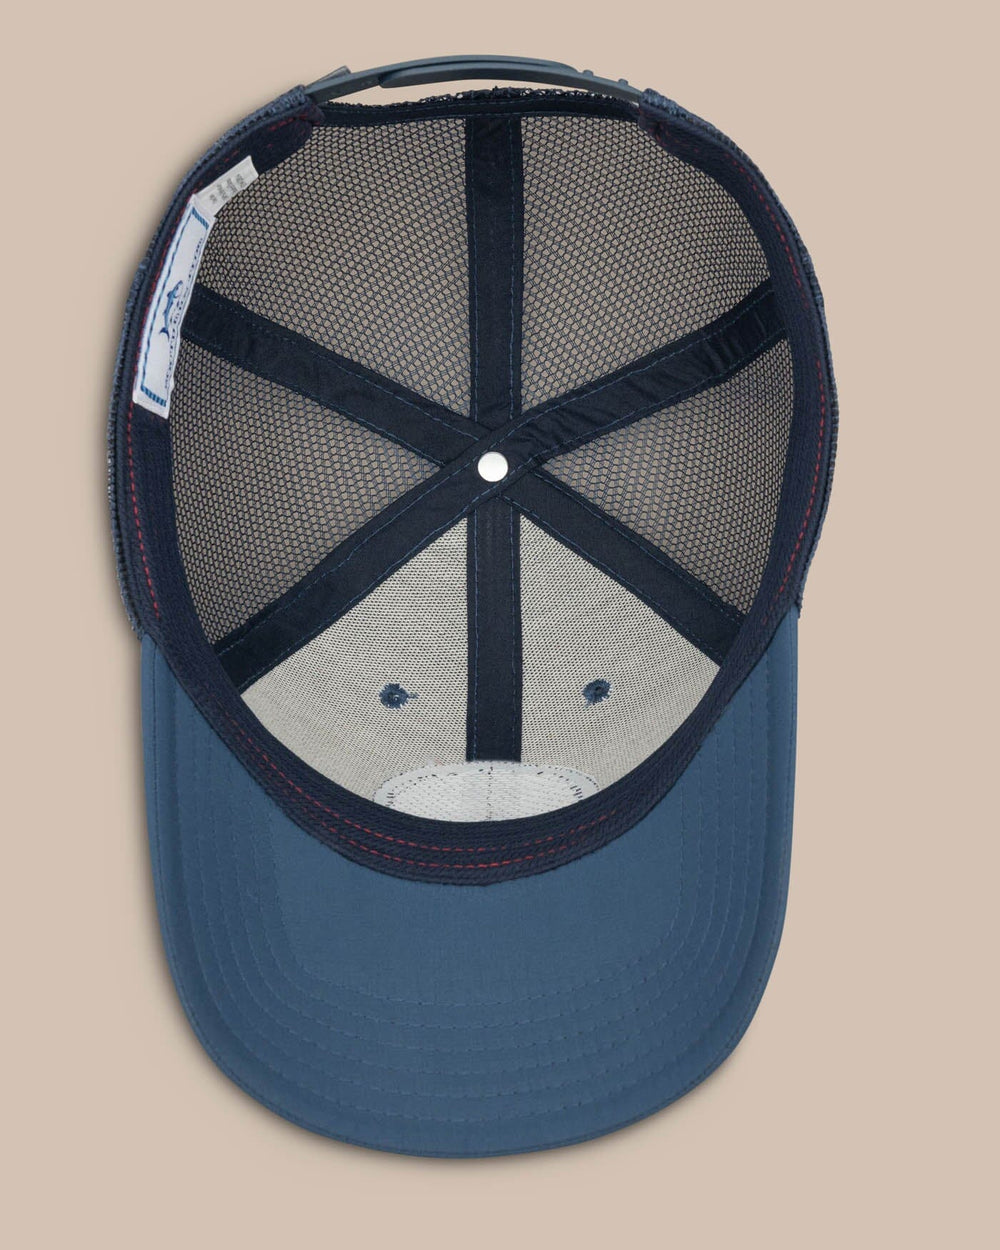 The below view of the Men's Alabama Patch Performance Trucker Hat by Southern Tide - Seven Seas Blue